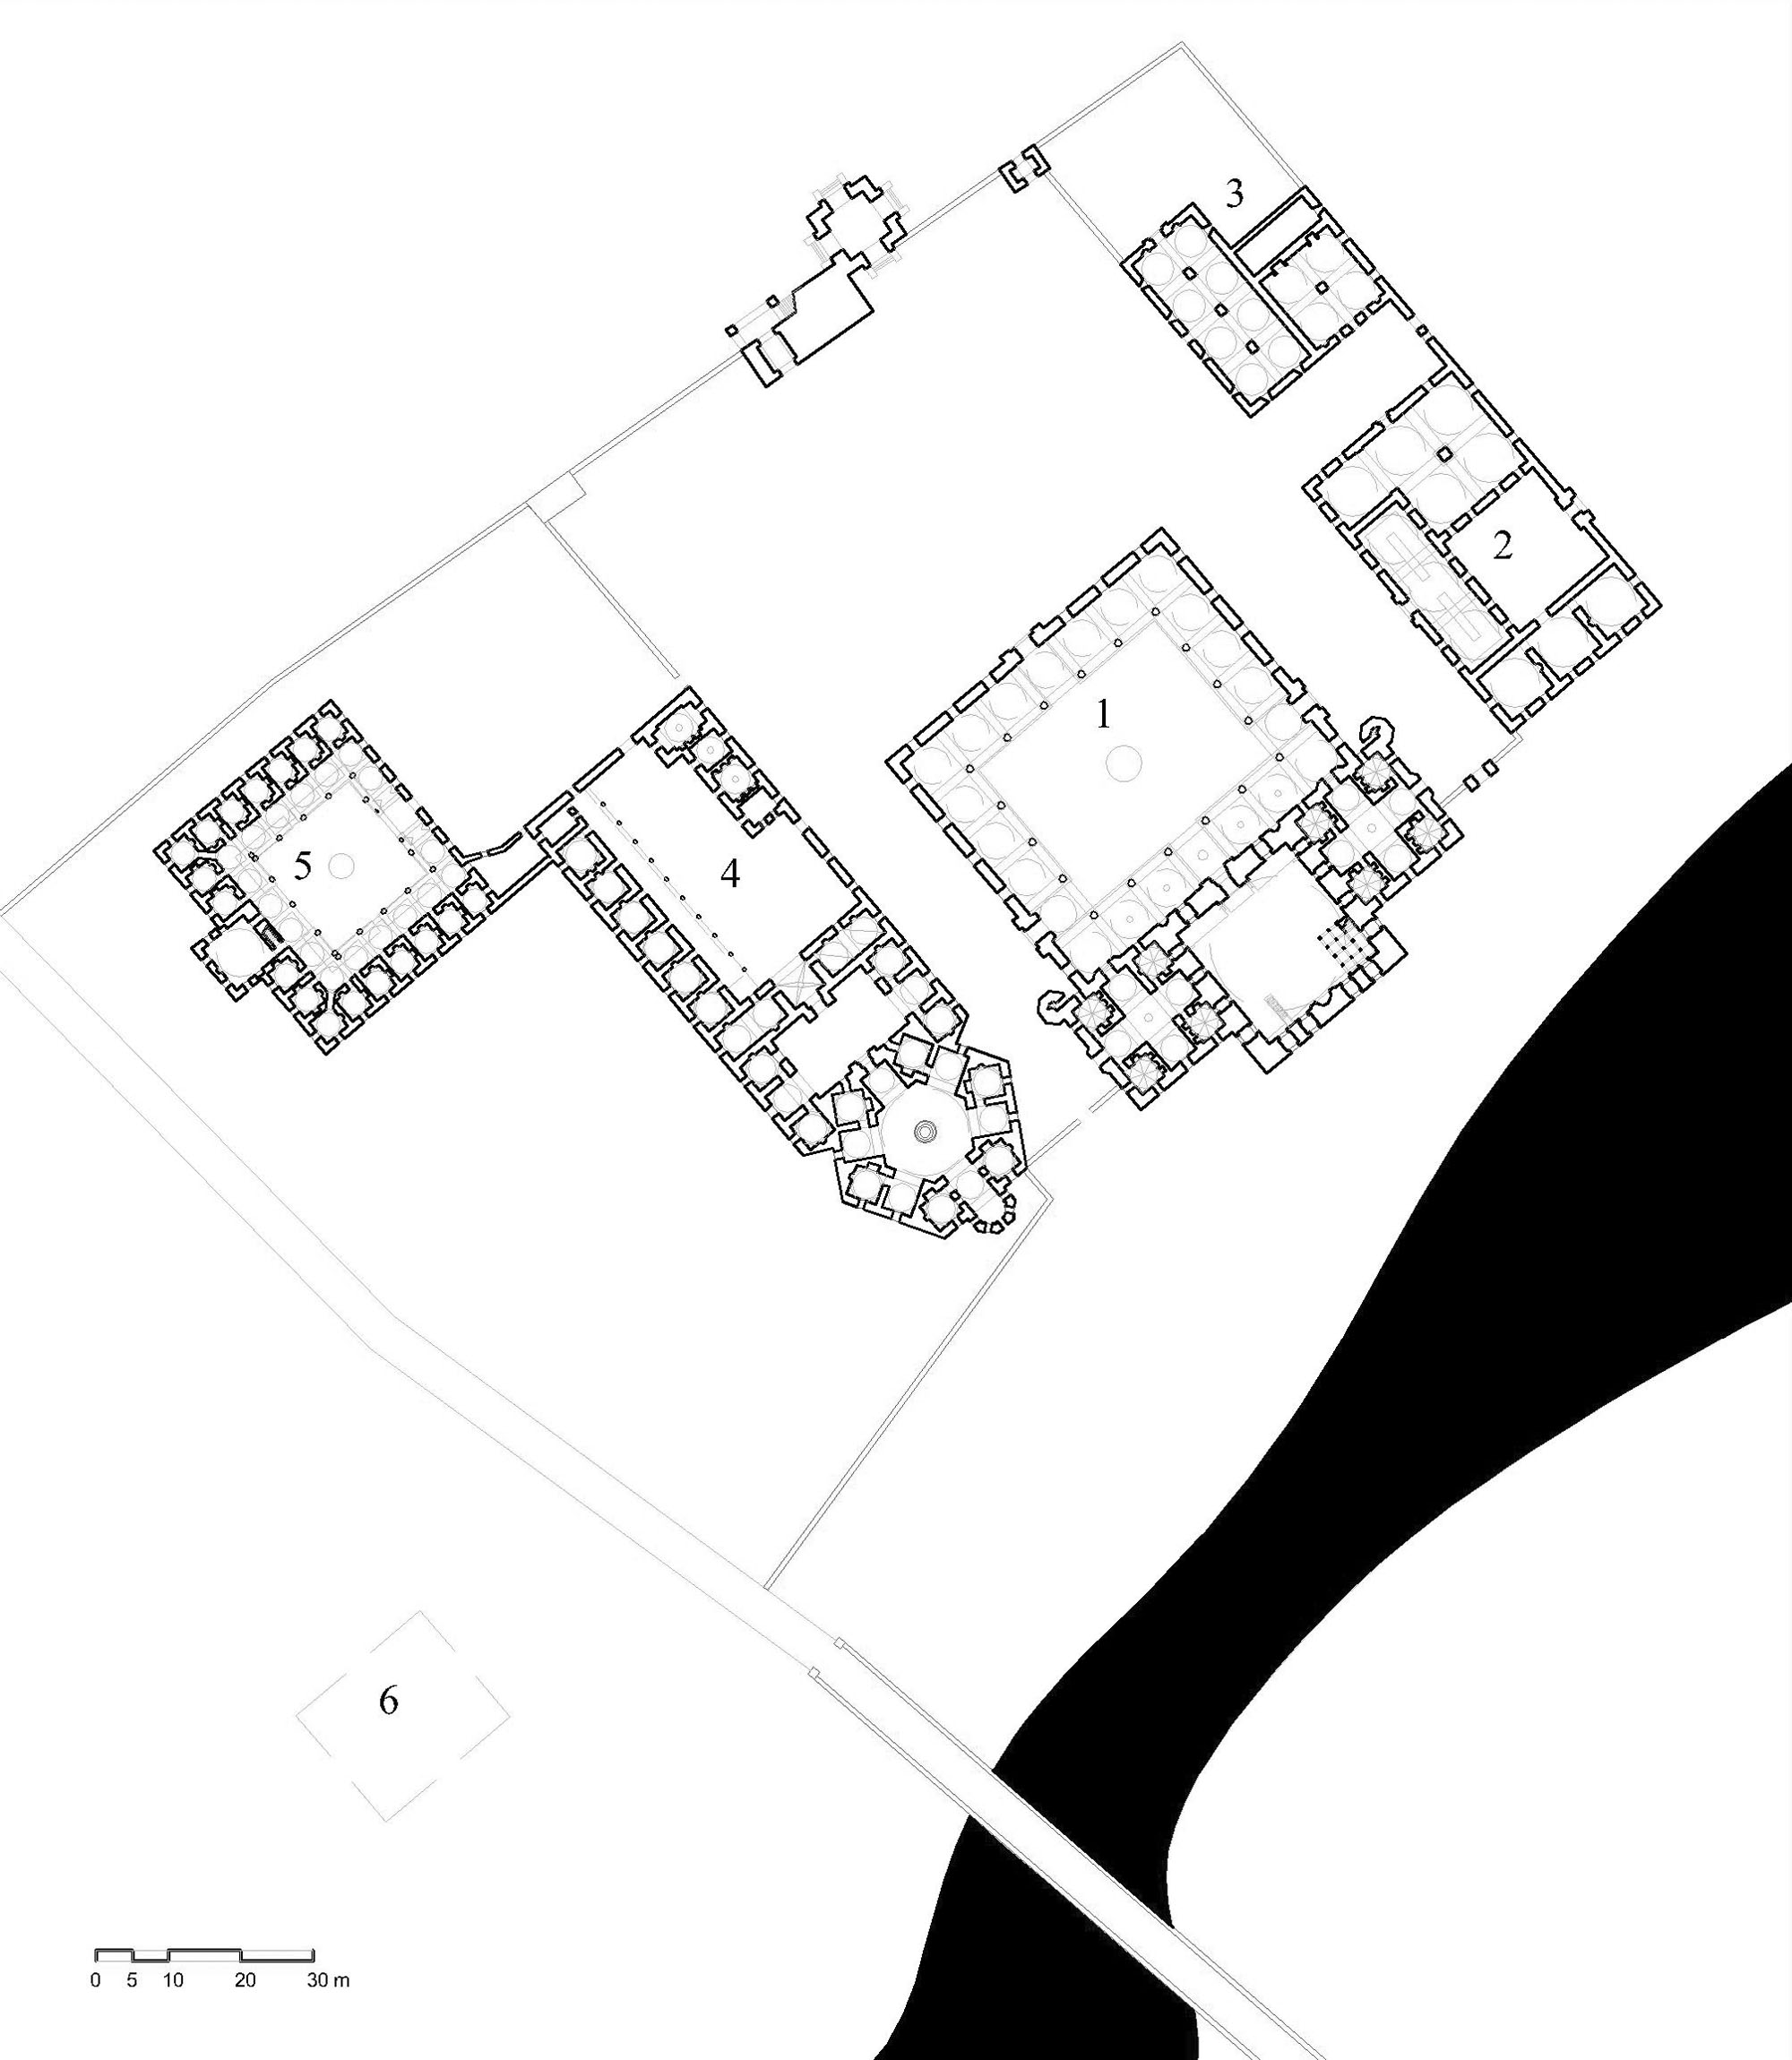 Architectural Drawings - Floor plan of complex along the Tunca river, showing (1) mosque, (2) hospice, (3) caravanserai, (4) hospital, (5) madrasa, (6) site of bathhouse